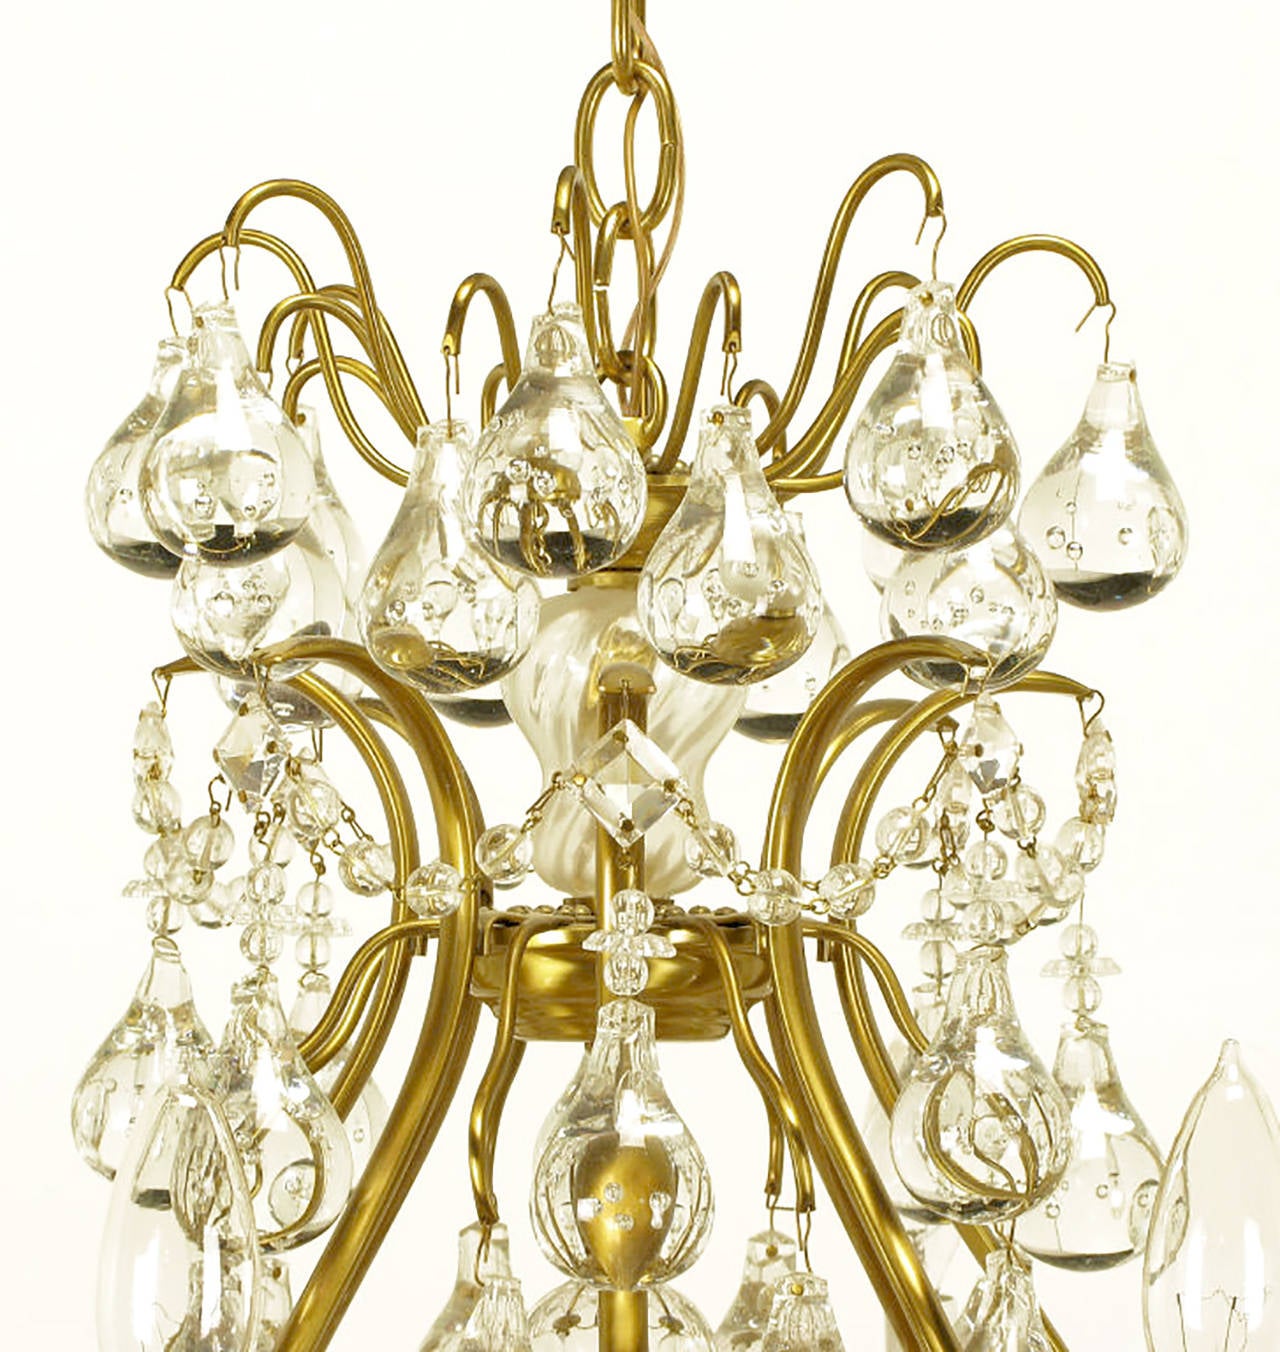 Mid-20th Century Brushed Brass and Raindrop Bubble Crystals Eight-Arm Chandelier For Sale